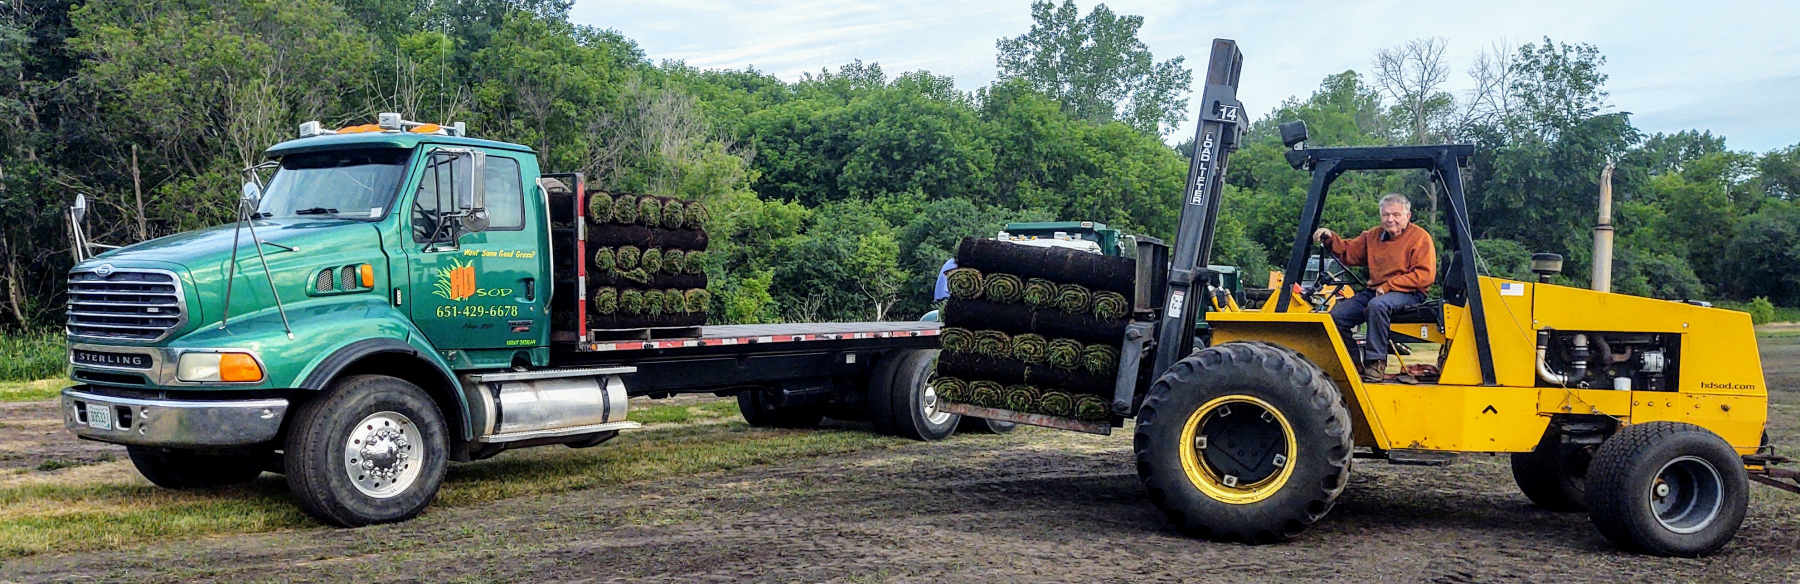 Hd Sod delivery truck with Harley on HD Sod's forklift